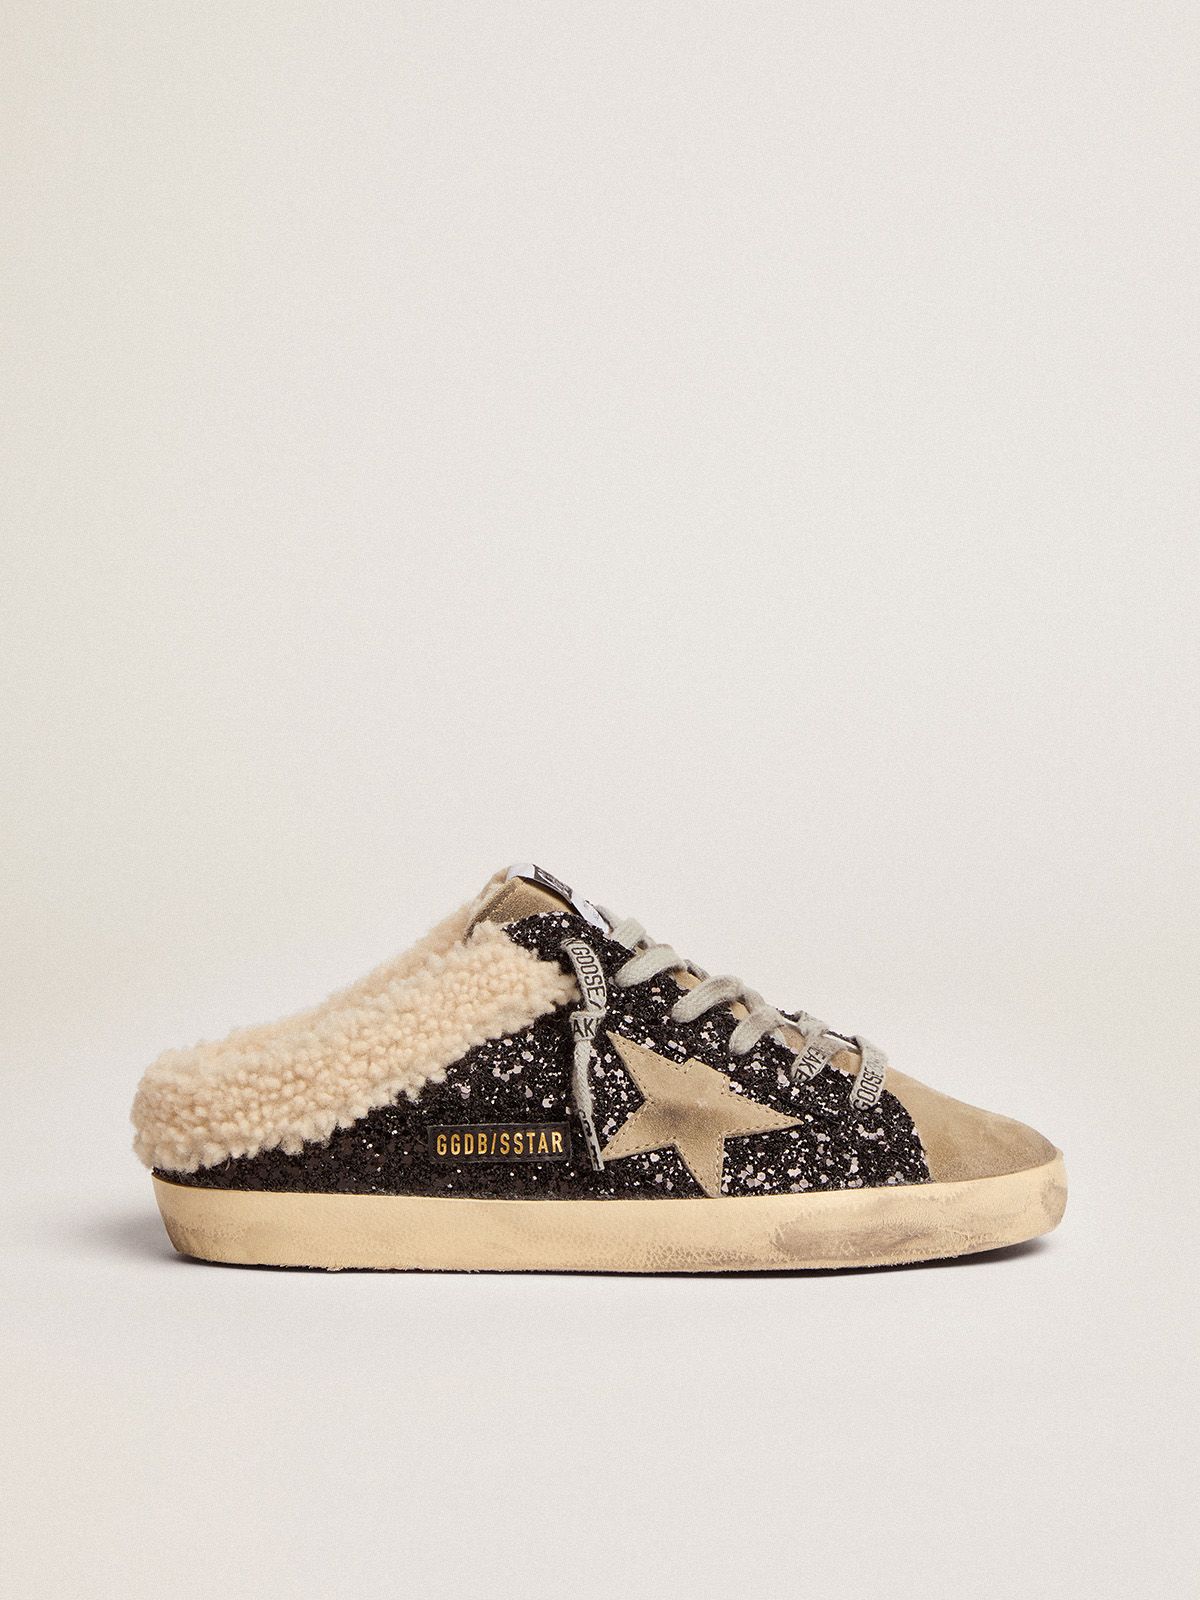 golden goose star suede in and shearling Sabots LTD dove-gray glitter with black Super-Star lining